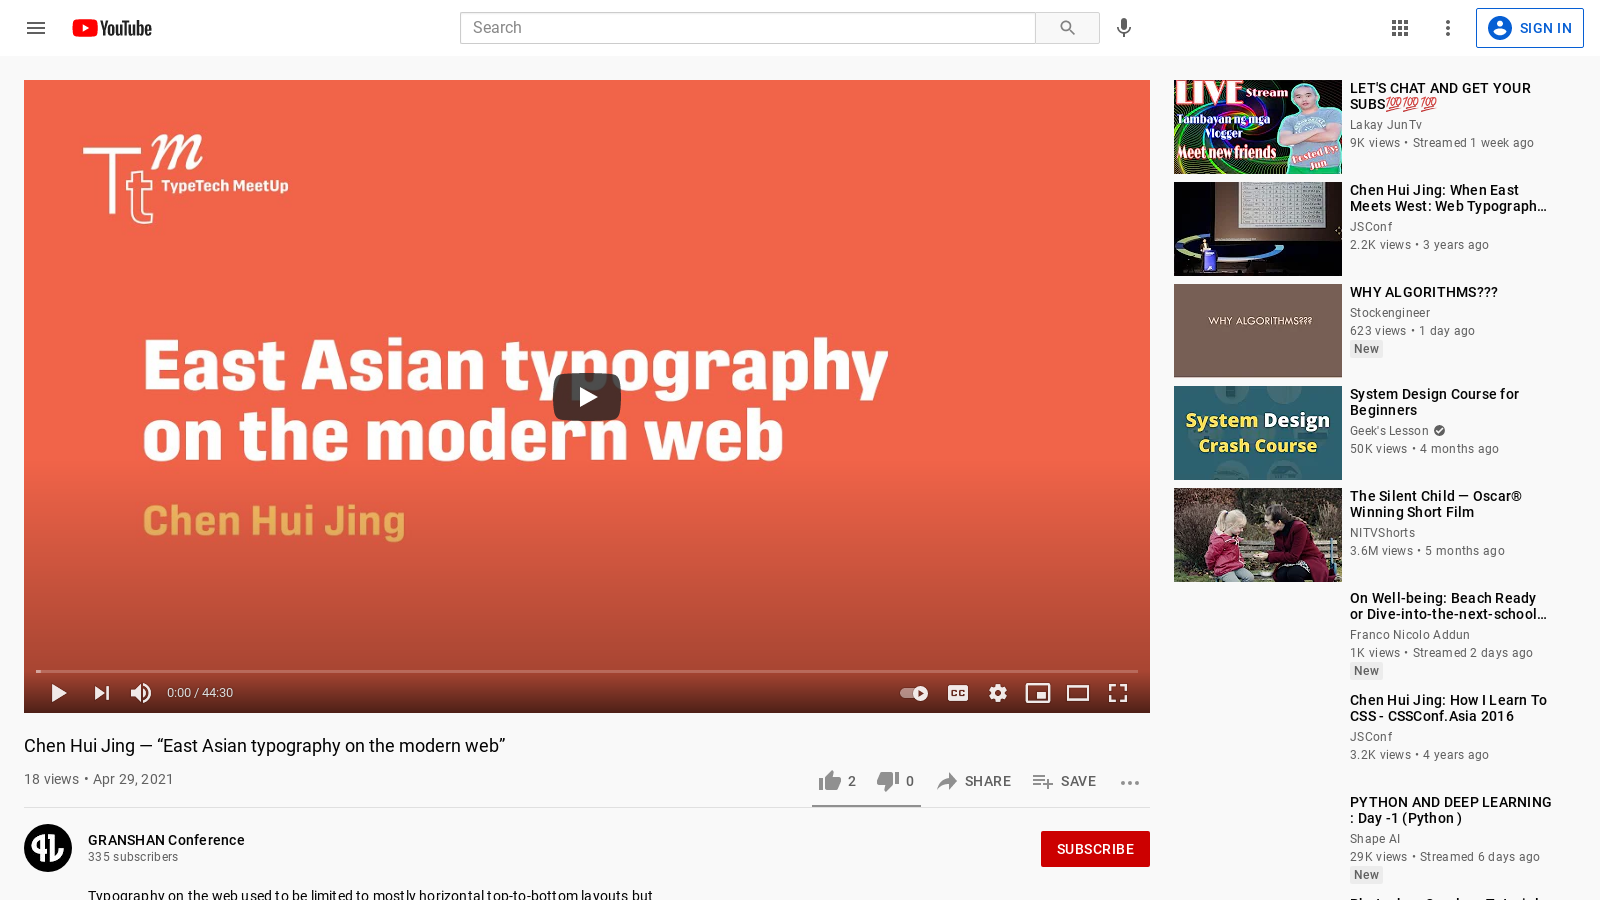 East Asian typography on the modern web